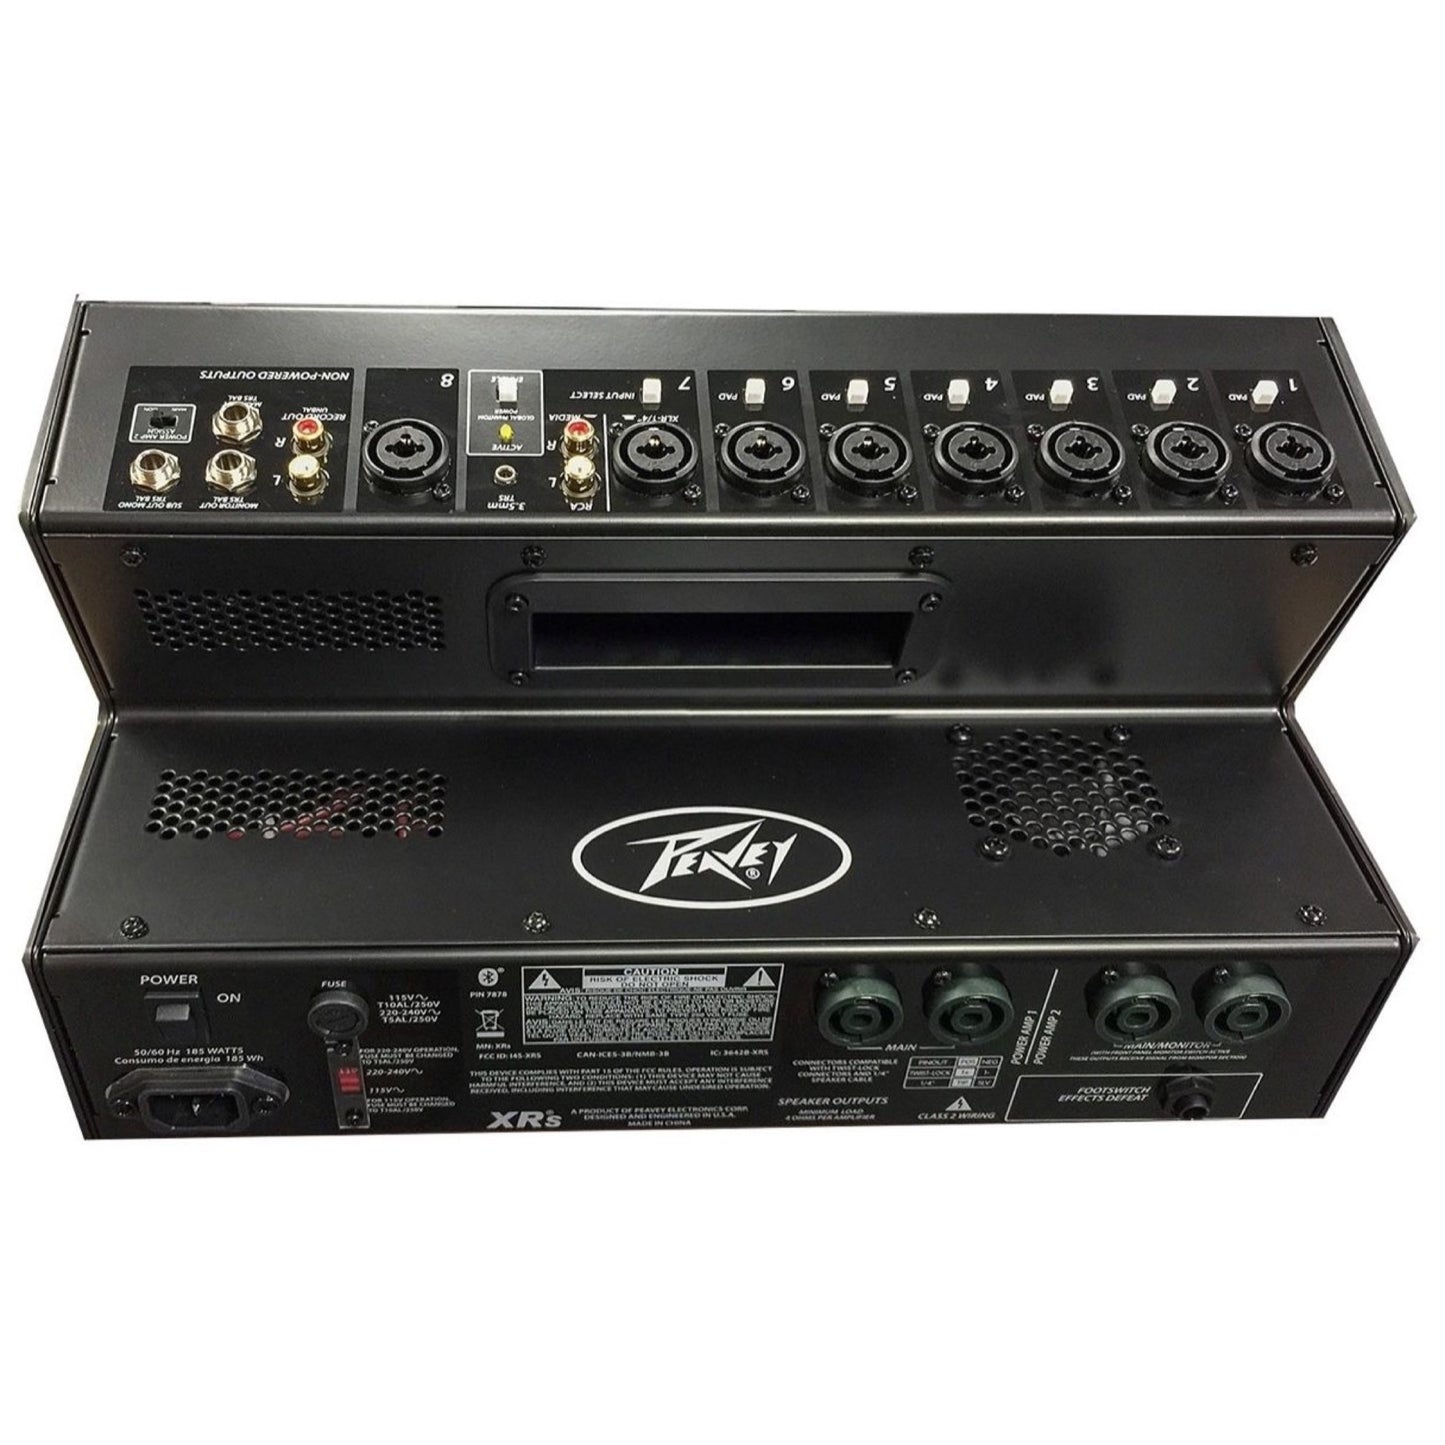 Peavey XR-S Powered Mixer, 8-Channel (1000 Watts)